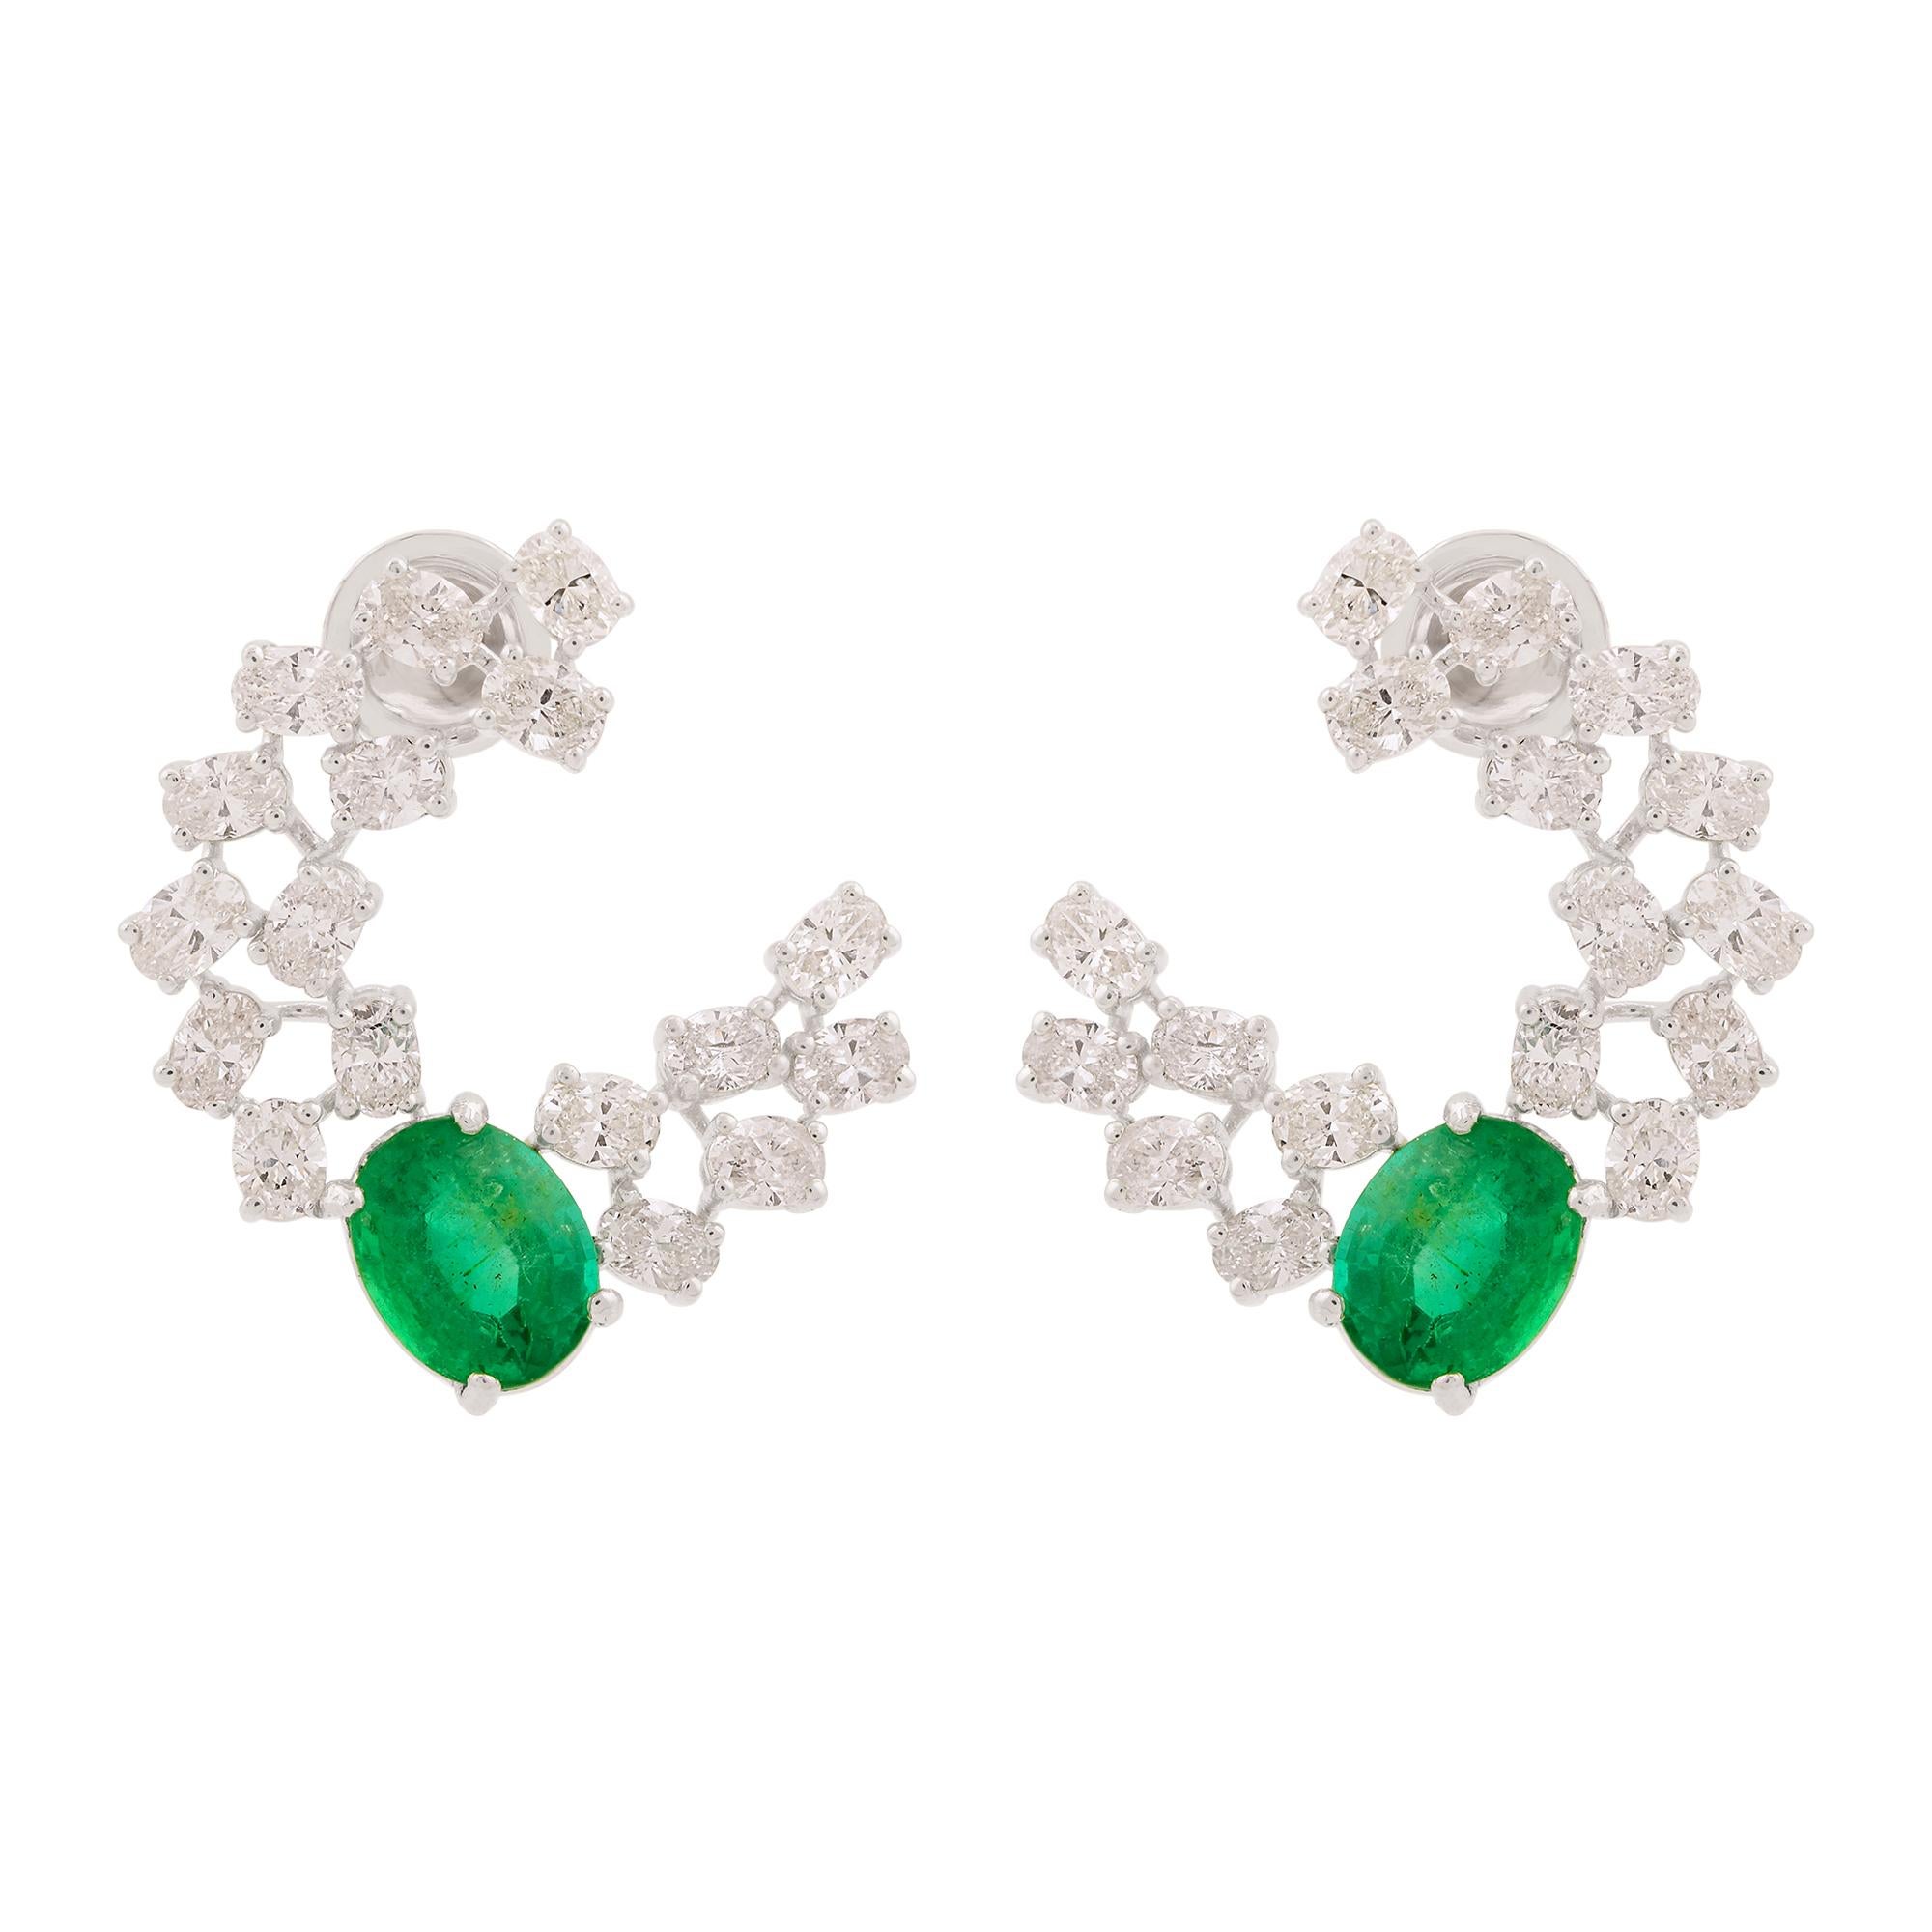 Item Code:- SEE-11729
Gross Weight :- 8.31 gm
18k Solid White Gold Weight :- 6.32 gm
Natural Diamond Weight :- 3.96 ct.  ( AVERAGE DIAMOND CLARITY SI1-SI2 & COLOR H-I )
Zambian Emerald Weight :- 6 ct.
Earrings Size : 24 mm (approx.)

✦